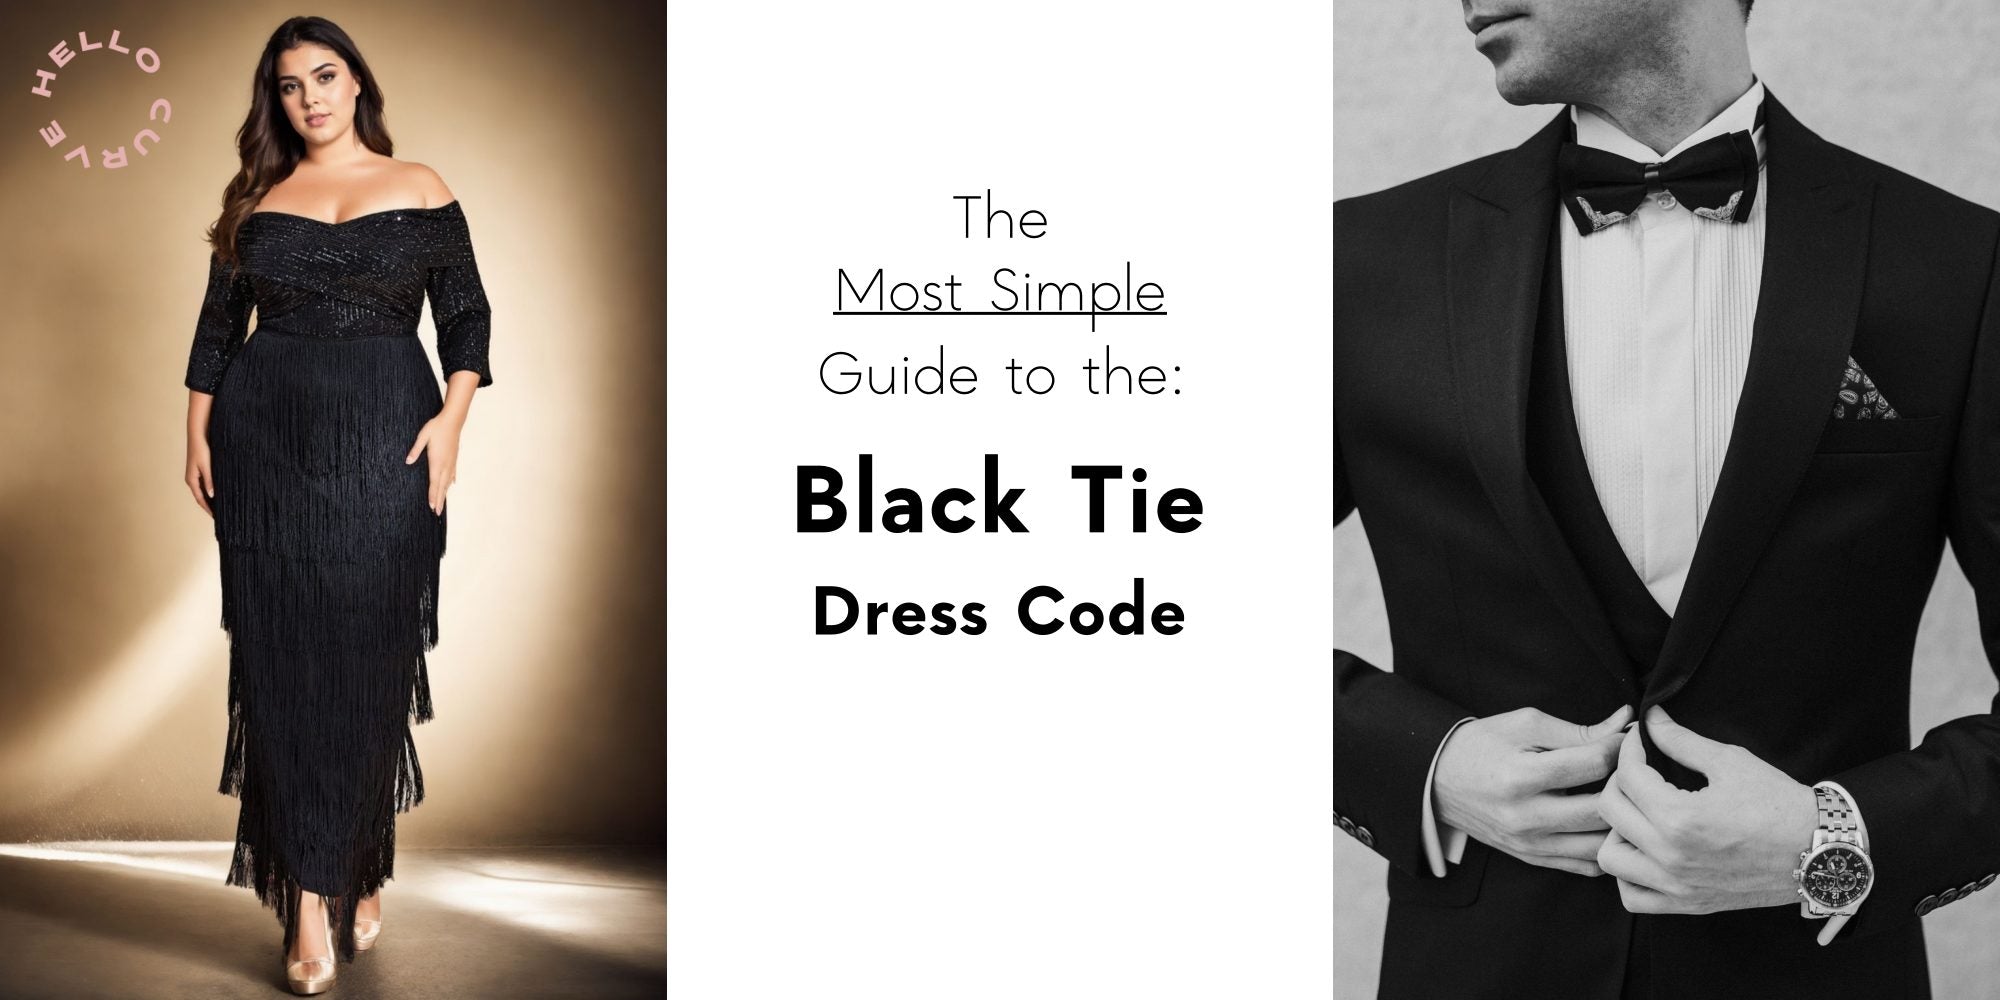 The Black Tie Dress Code Guide